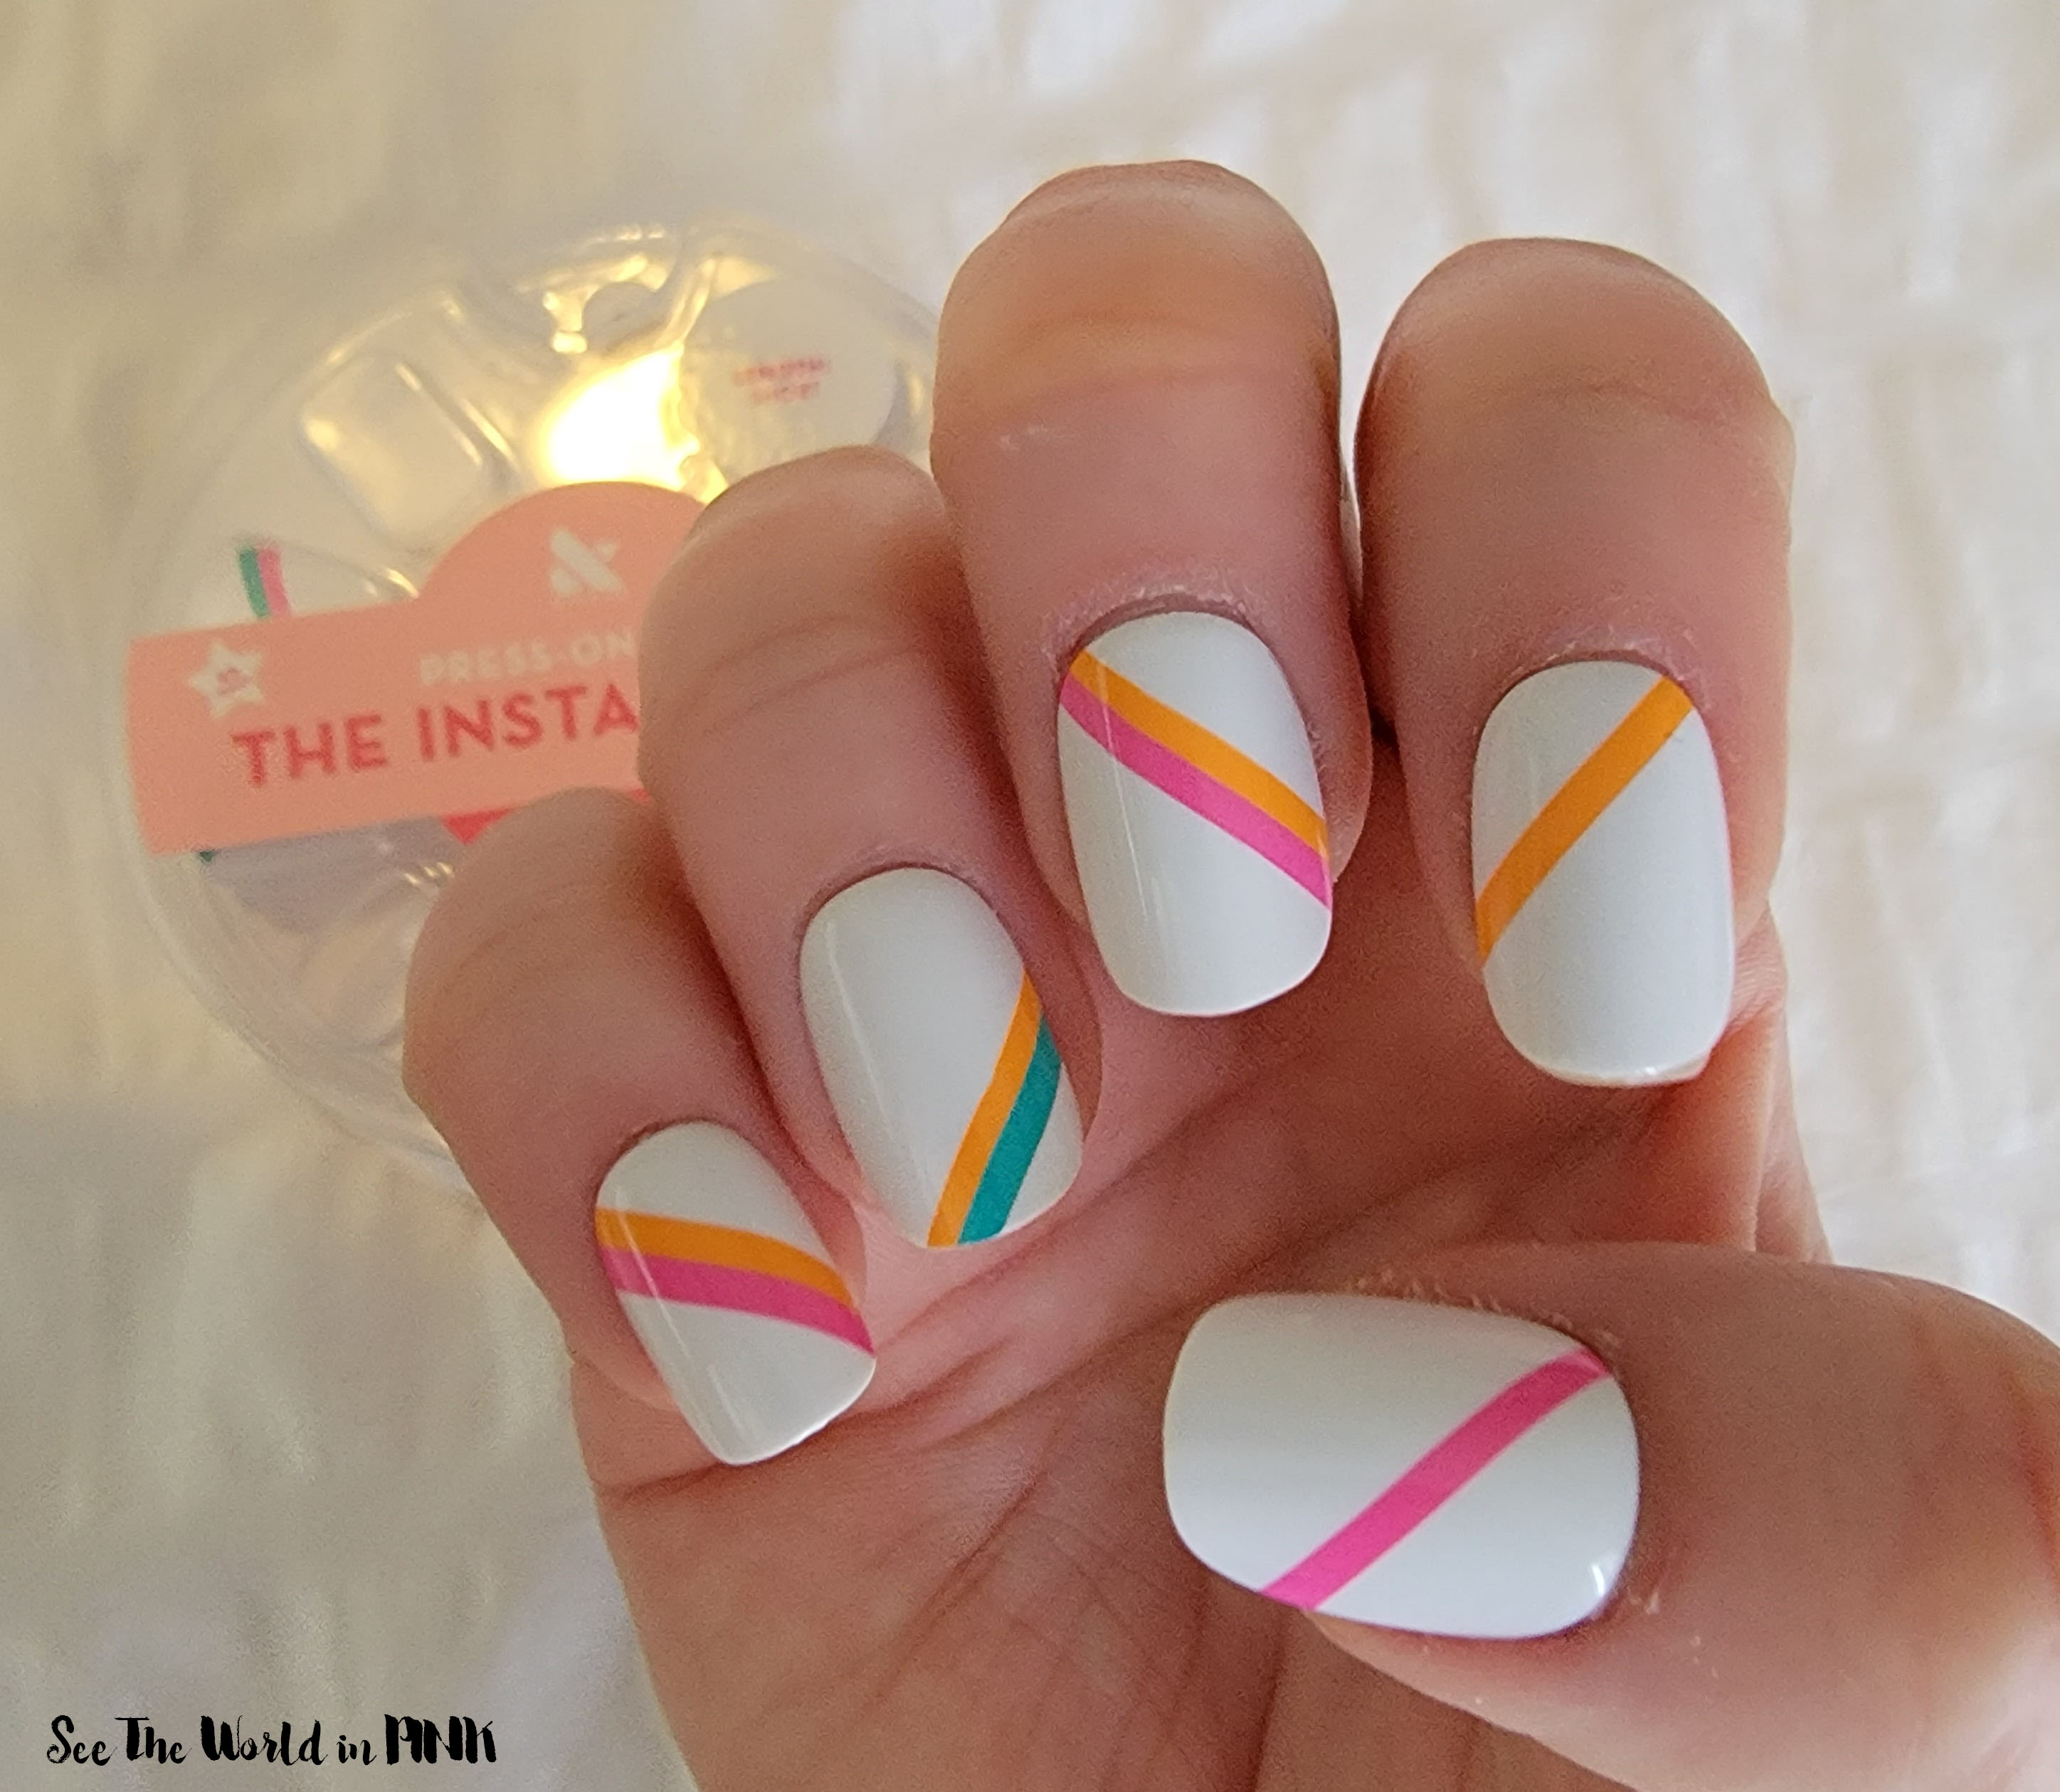 ehmkay nails: Neon Citrus Nail Art with Garden Path Lacquers